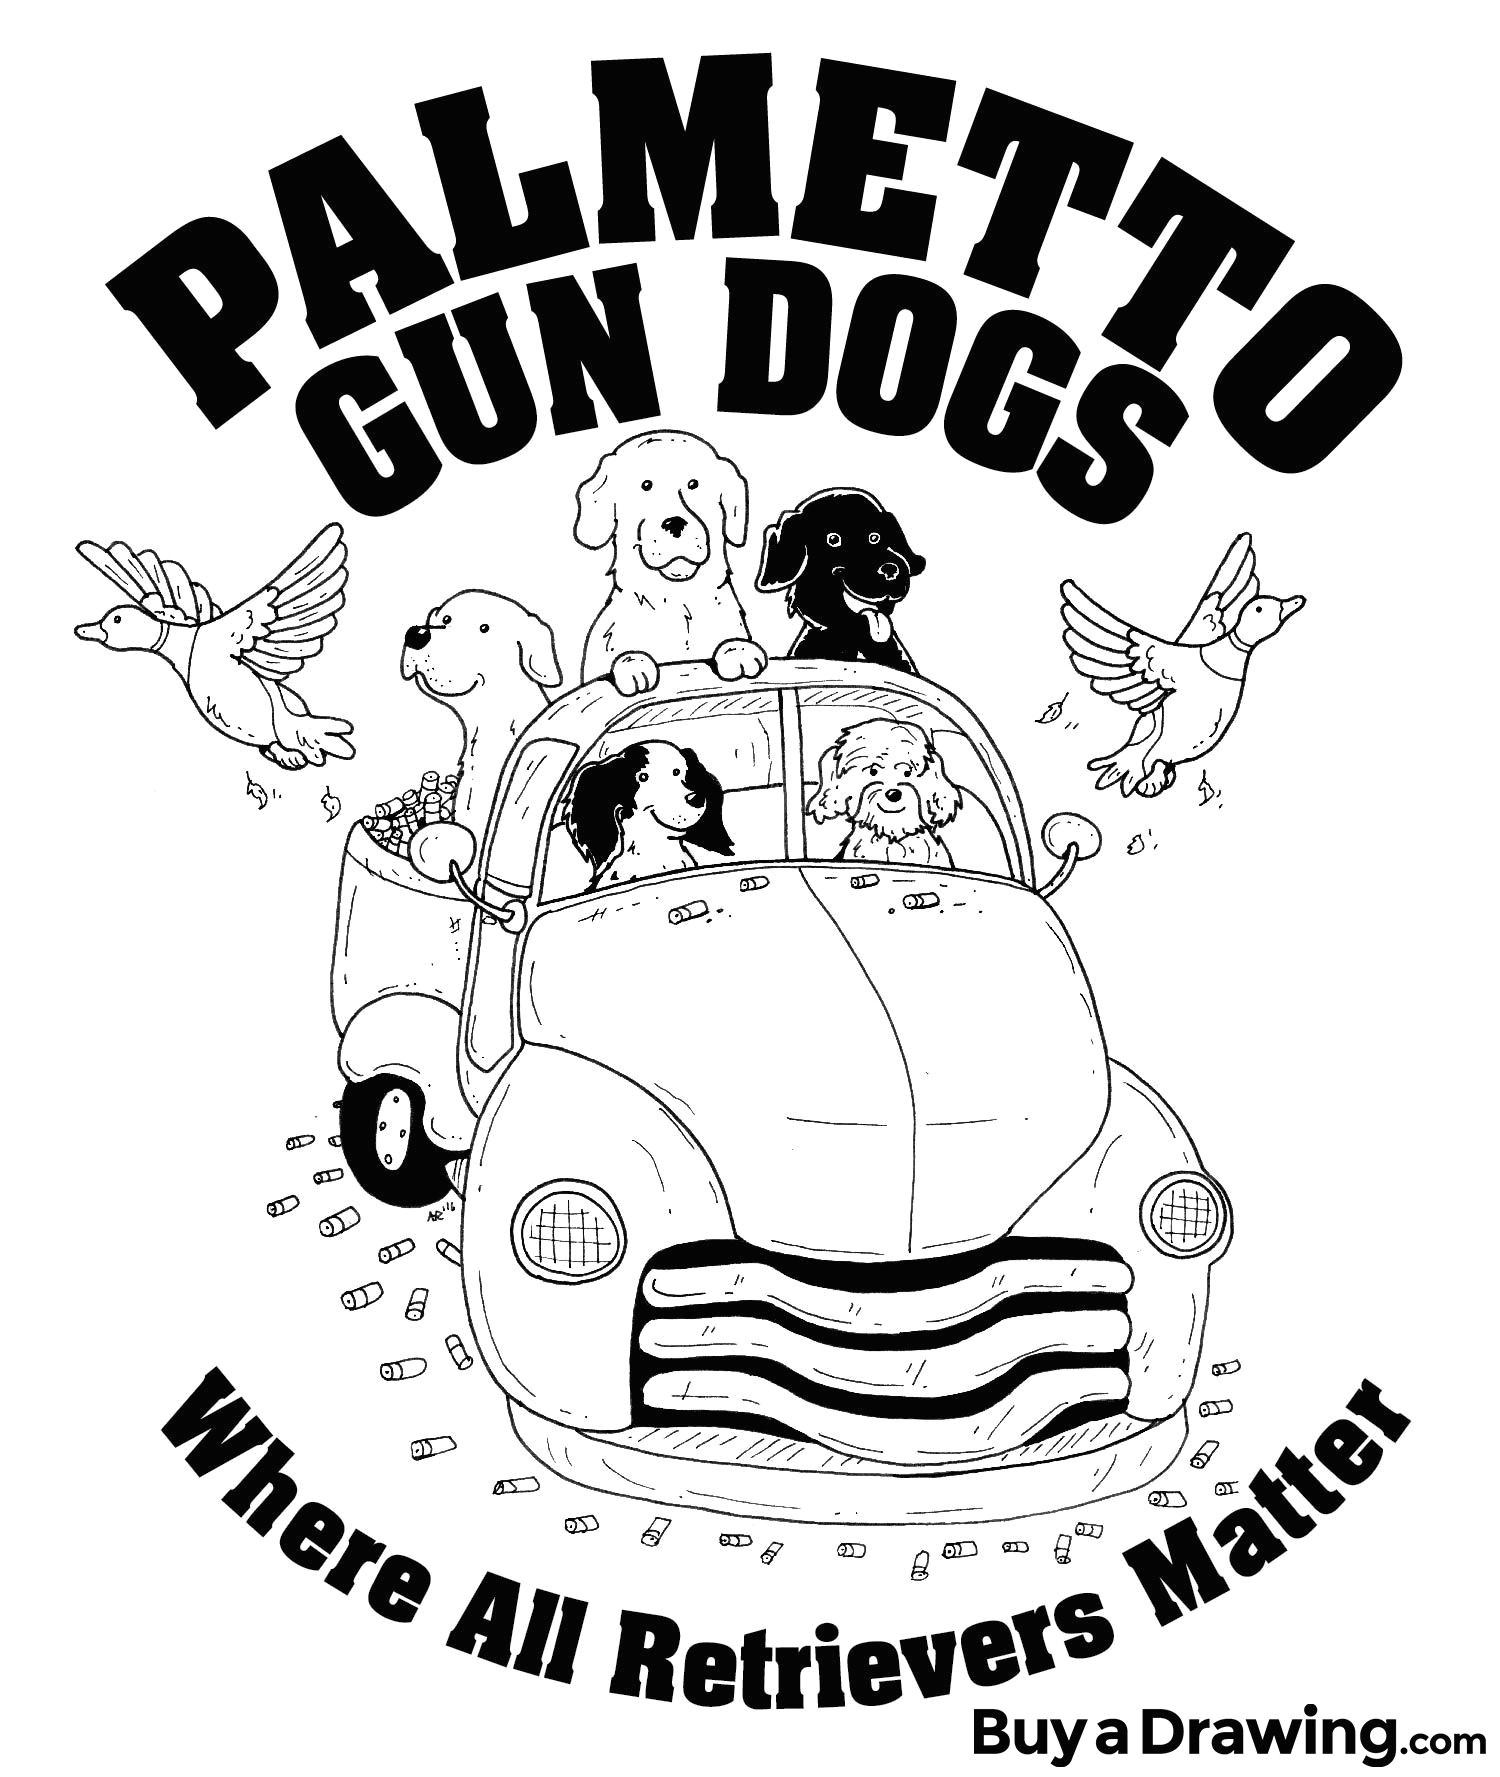 i always love an excuse to draw cute dogs here s one i did for palmetto gun dogs kennel in rembert sc dogs dog gun guns retriever pickup truck